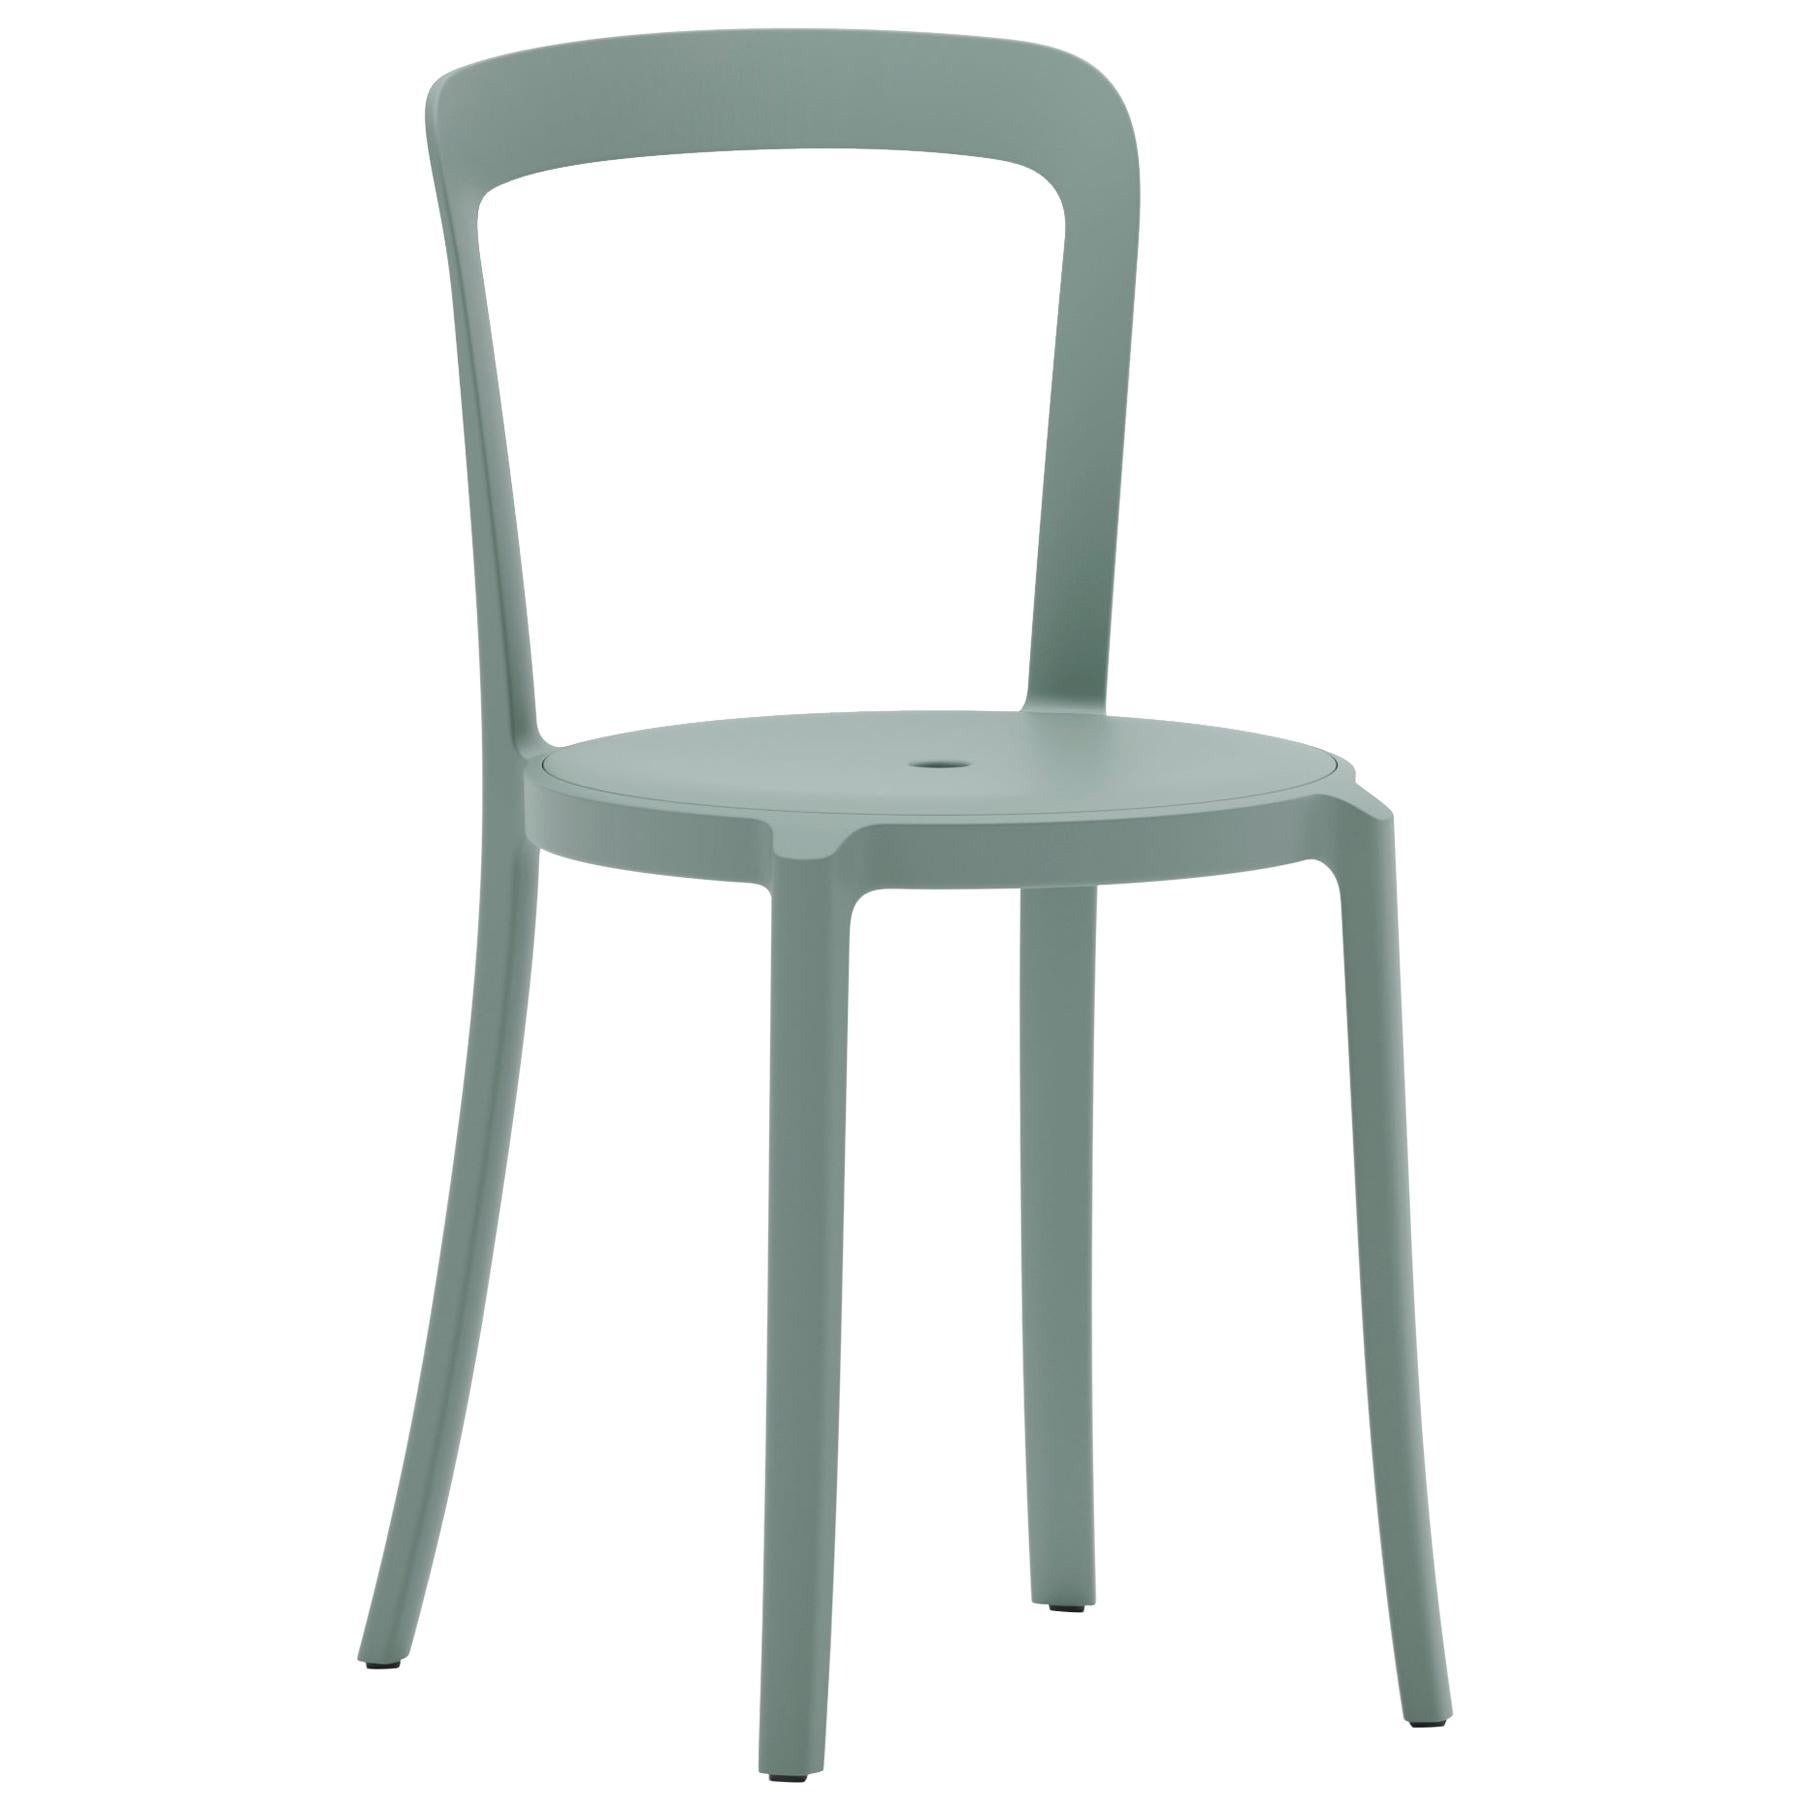 Emeco On & On Stacking Chair in Light Blue Plastic by Barber & Osgerby For Sale